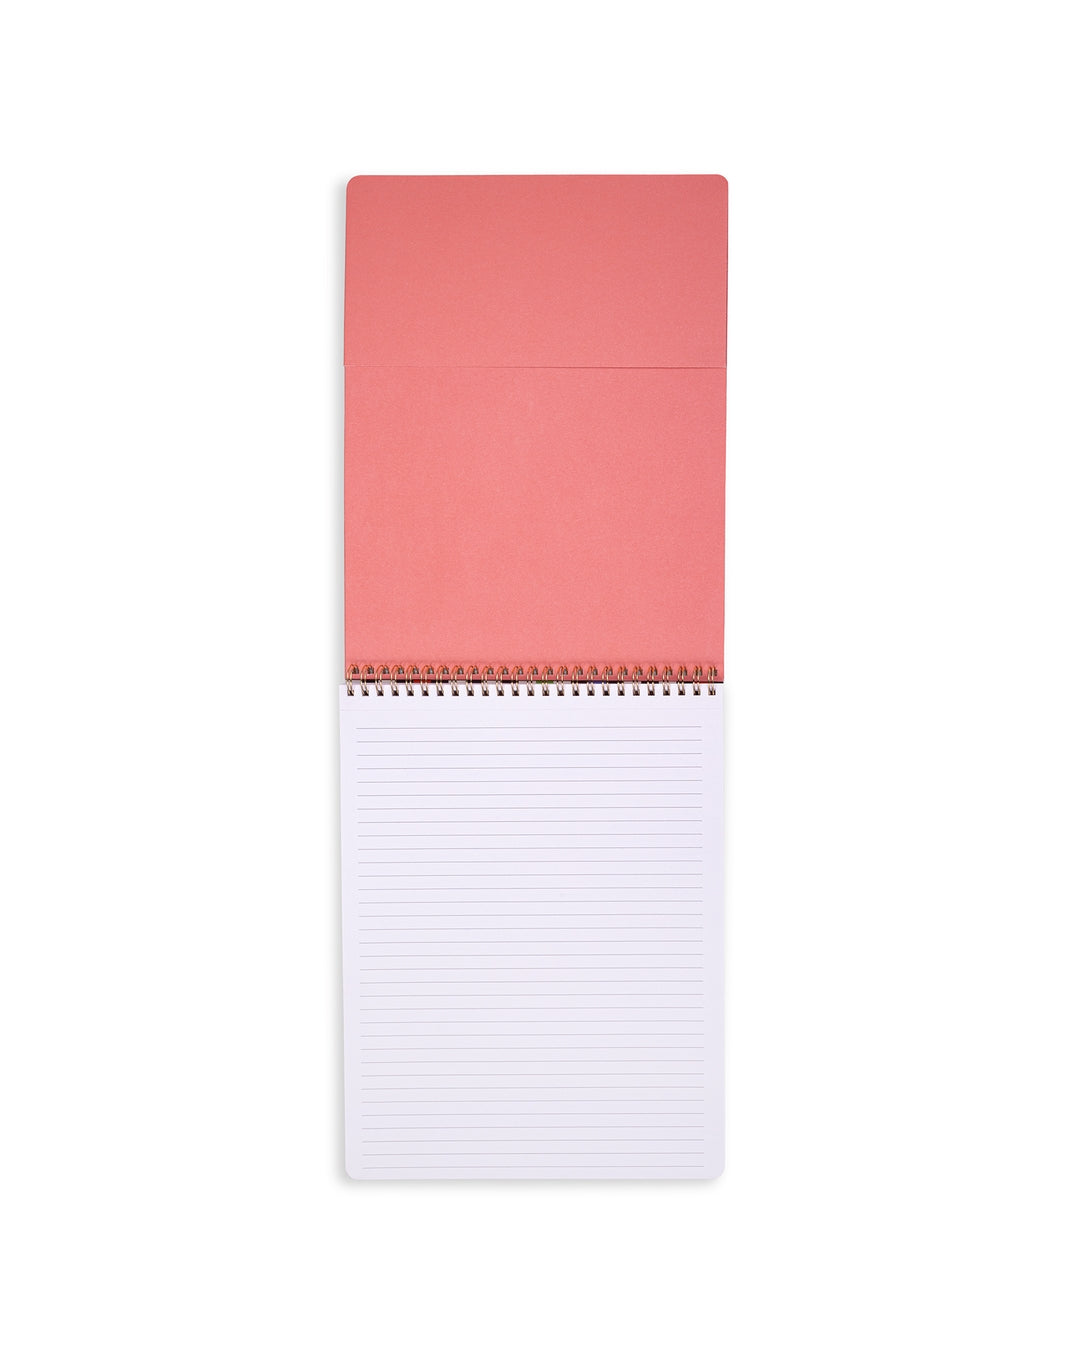 Rough Draft Top Spiral Notebook - Keep It Easy